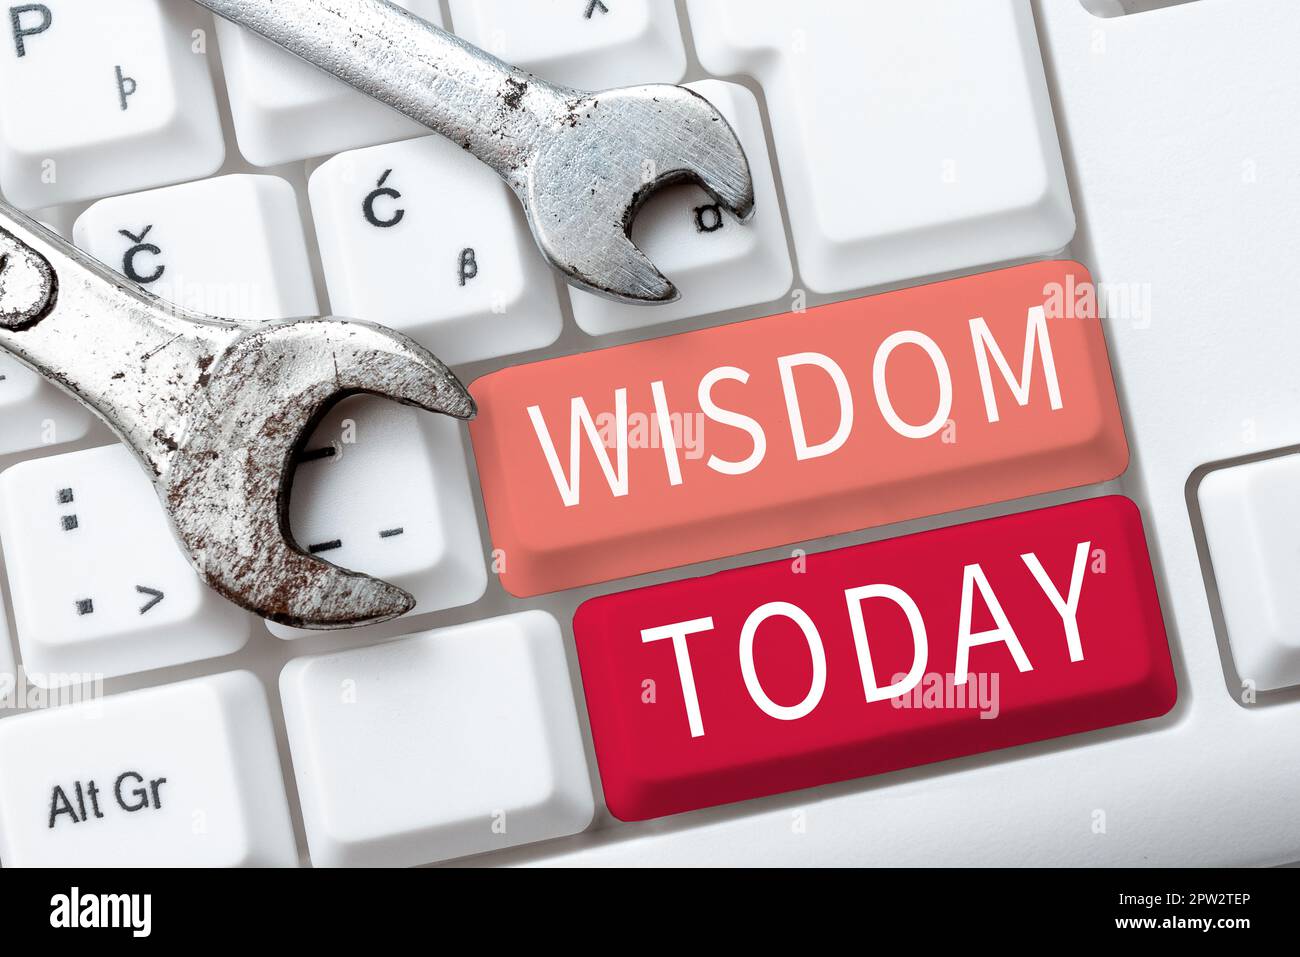 Writing displaying text Wisdom, Concept meaning body of knowledge and principles that develops within specific period Stock Photo